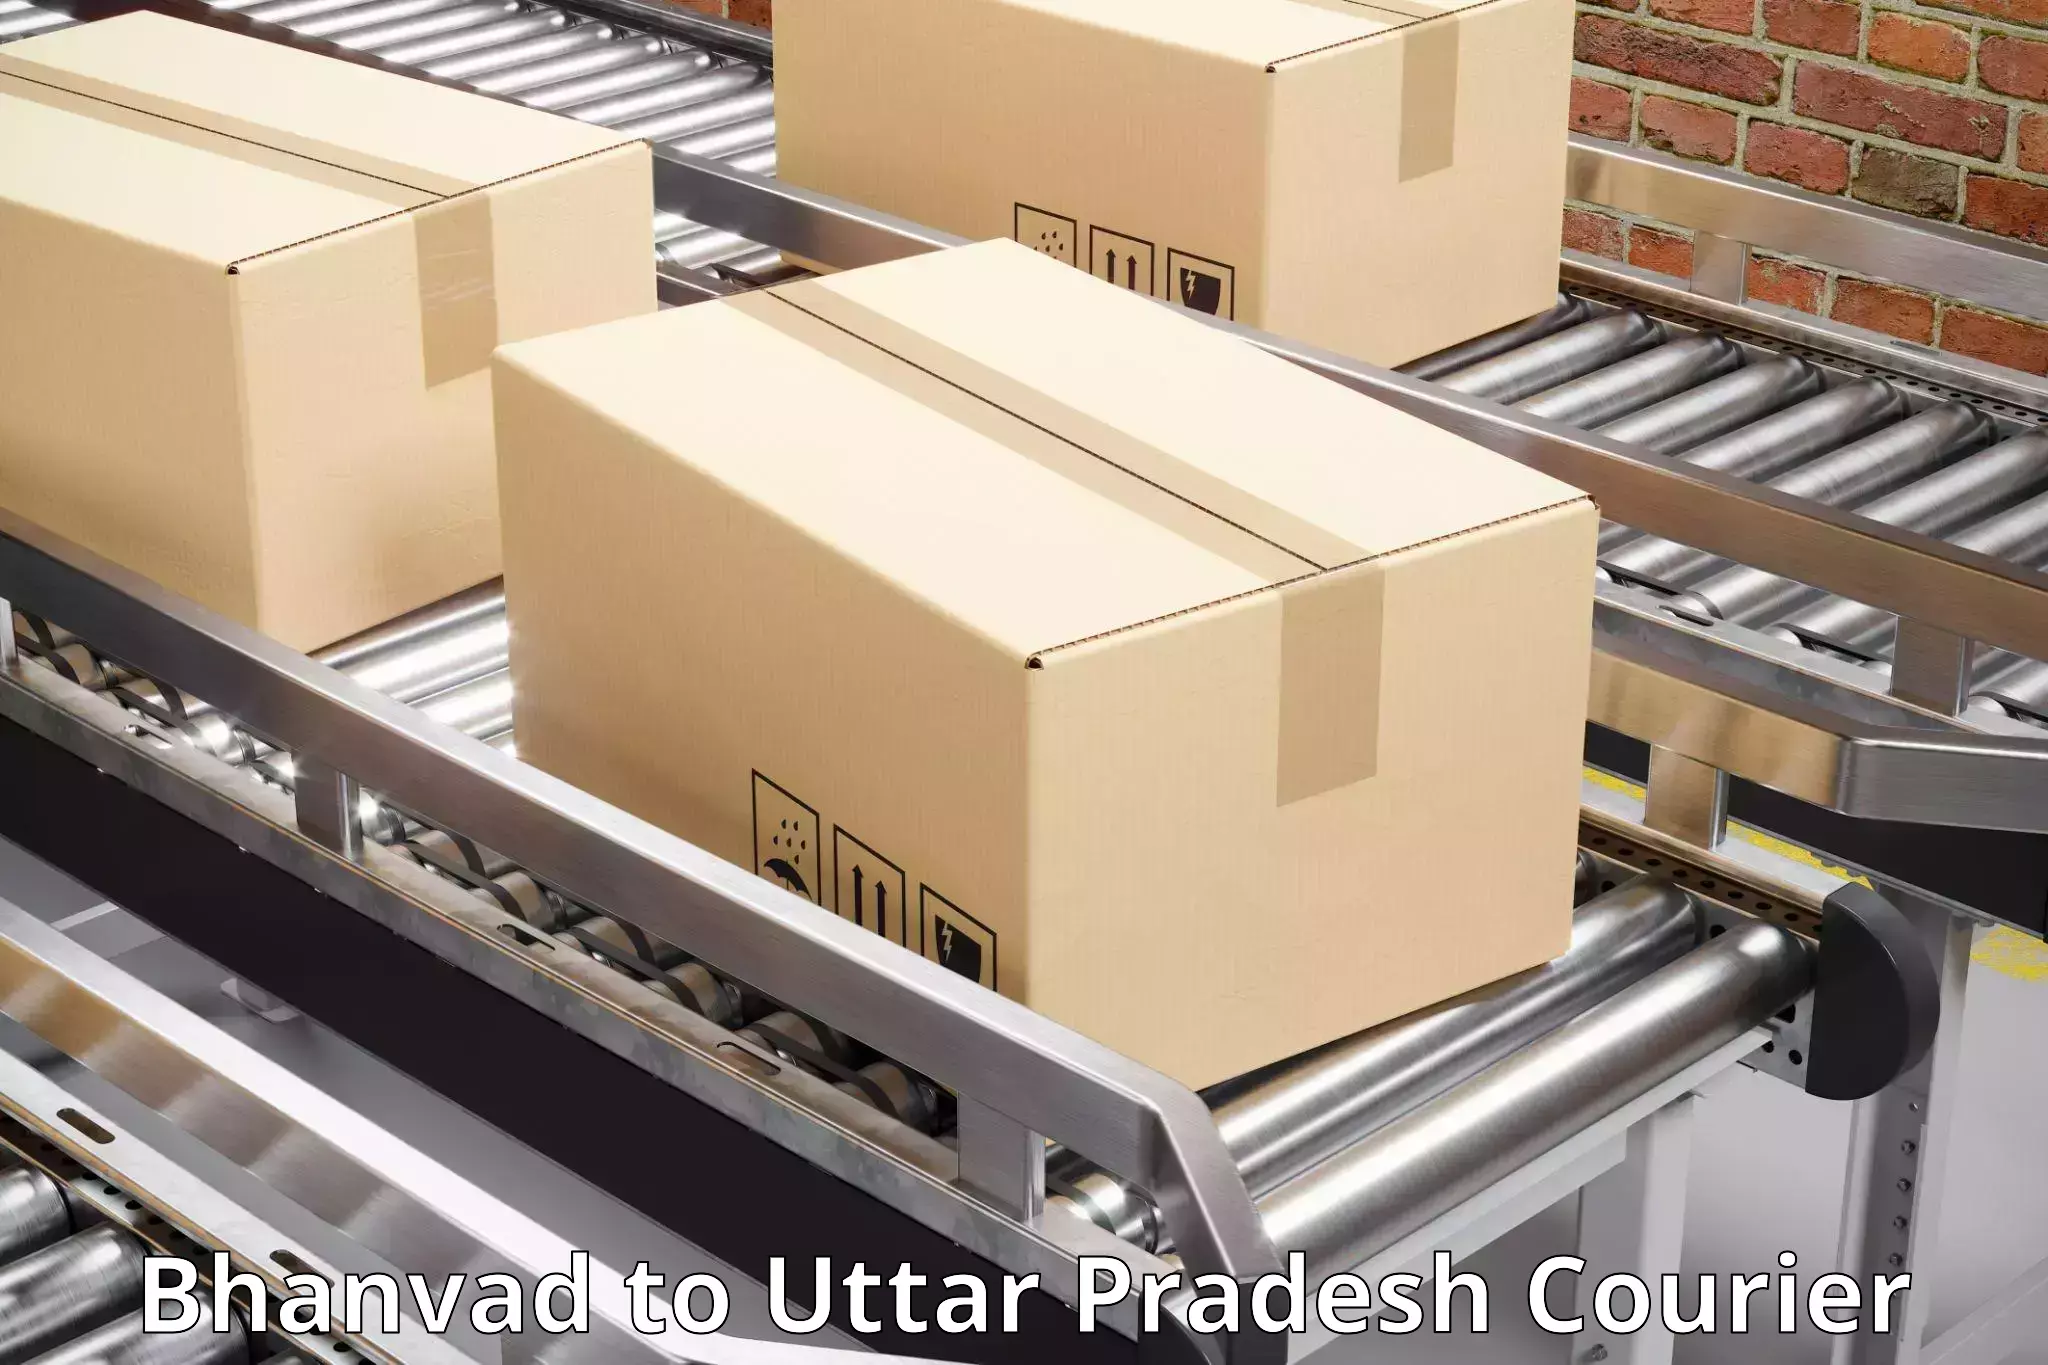 Personal parcel delivery Bhanvad to Cholapur